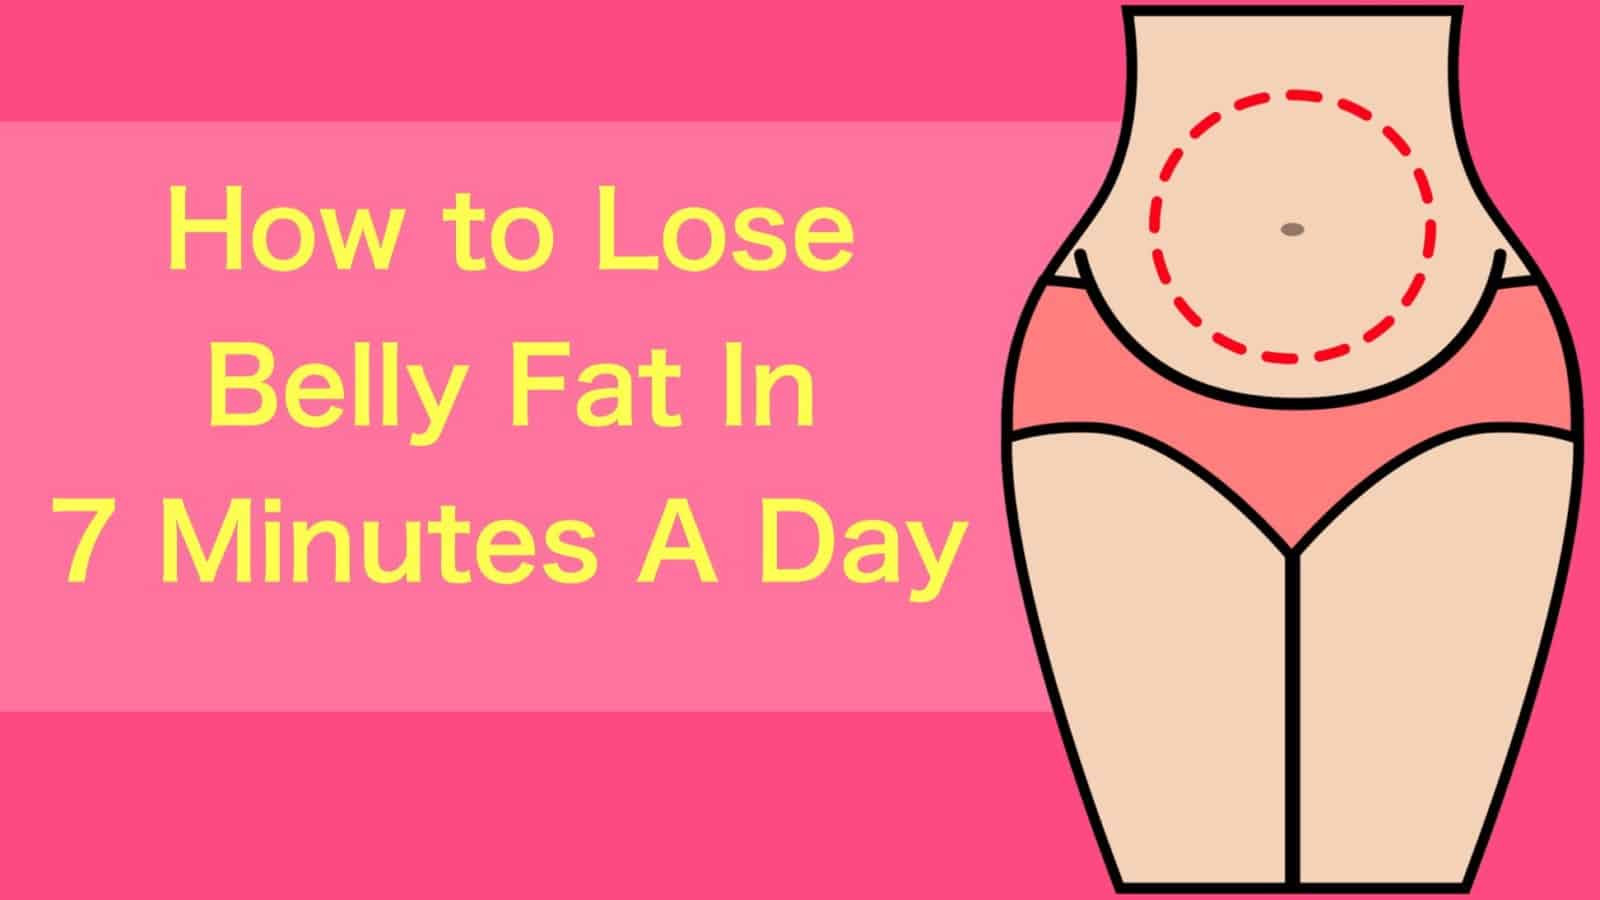 How To Lose Belly Fat Fast In A Day
 How to Lose Belly Fat In 7 Minutes A Day